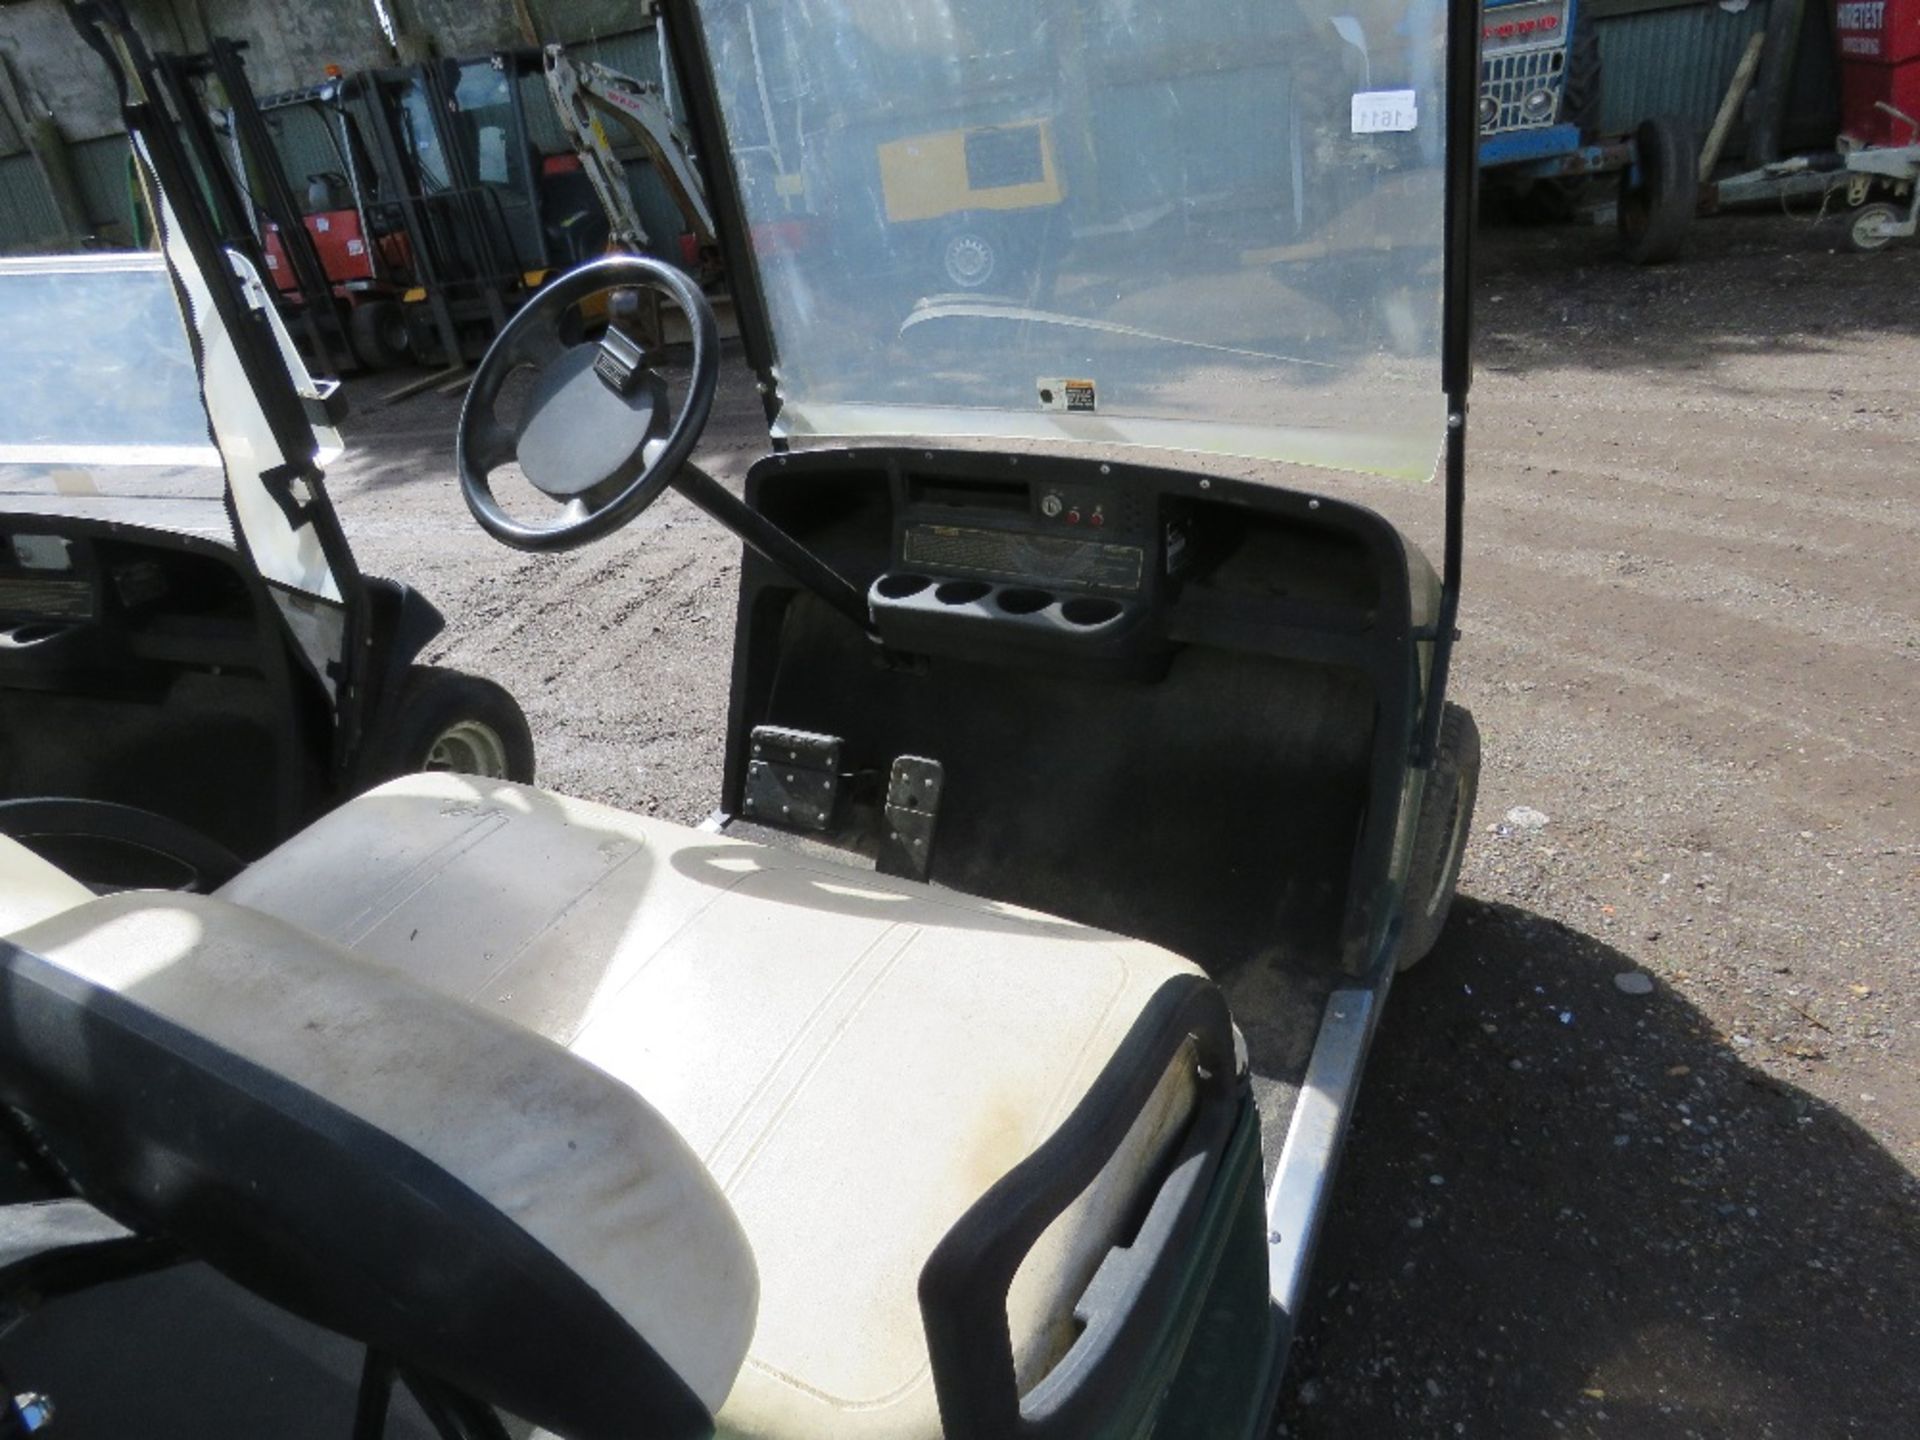 EZGO PETROL ENGINED GOLF BUGGY. GREEN COLOURED. WHEN TESTED WAS SEEN TO RUN, DRIVE, STEER AND BRAKE - Image 5 of 8